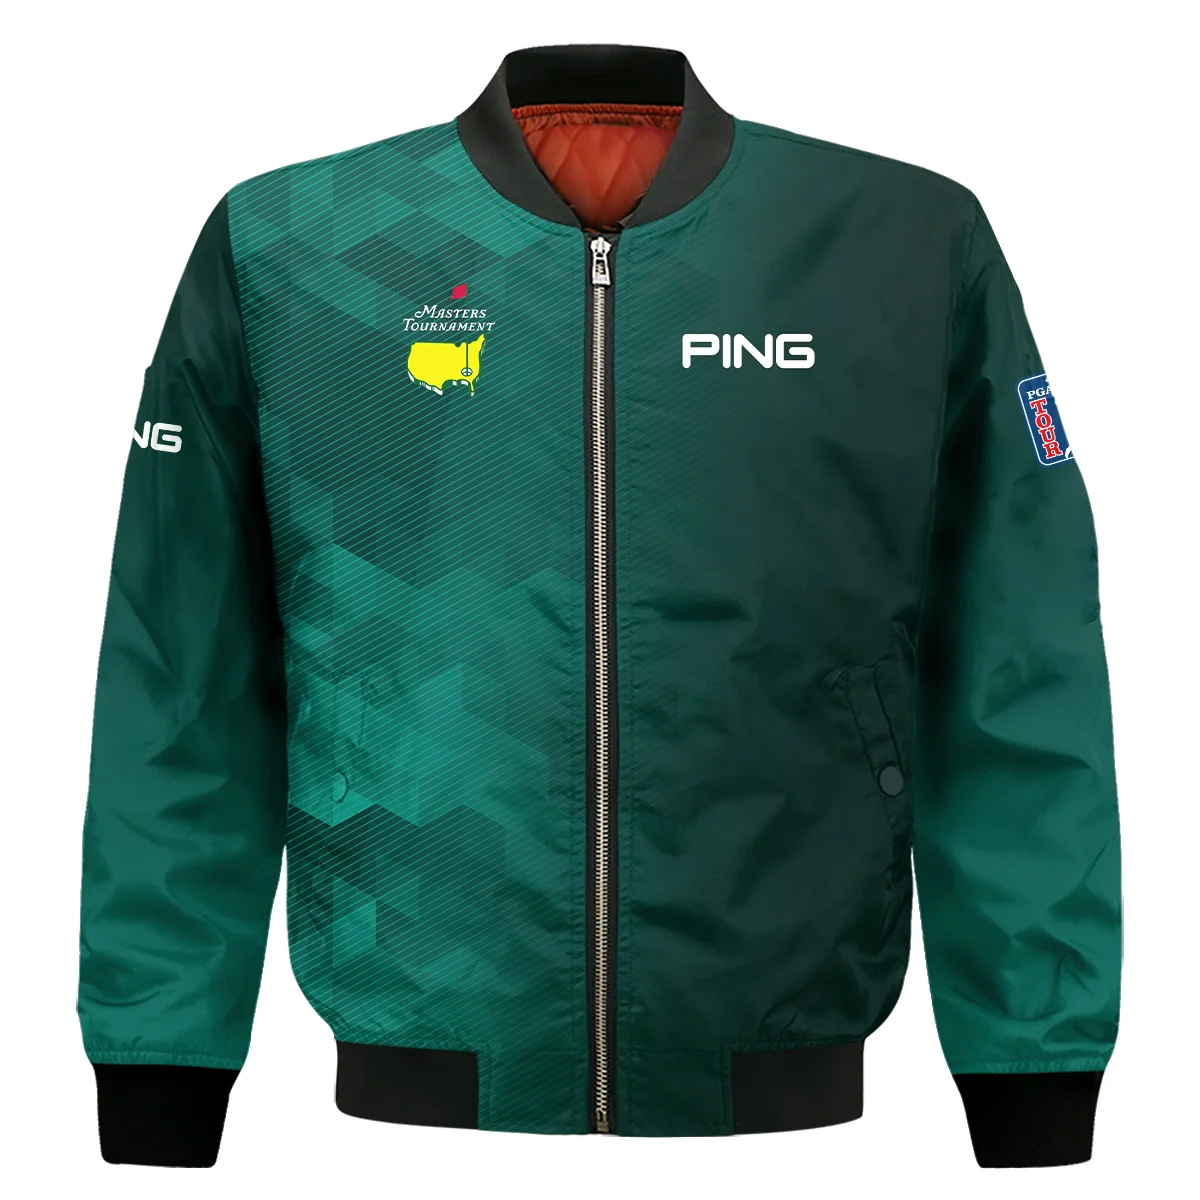 Ping Golf Sport Dark Green Gradient Abstract Background Masters Tournament Bomber Jacket Style Classic Bomber Jacket